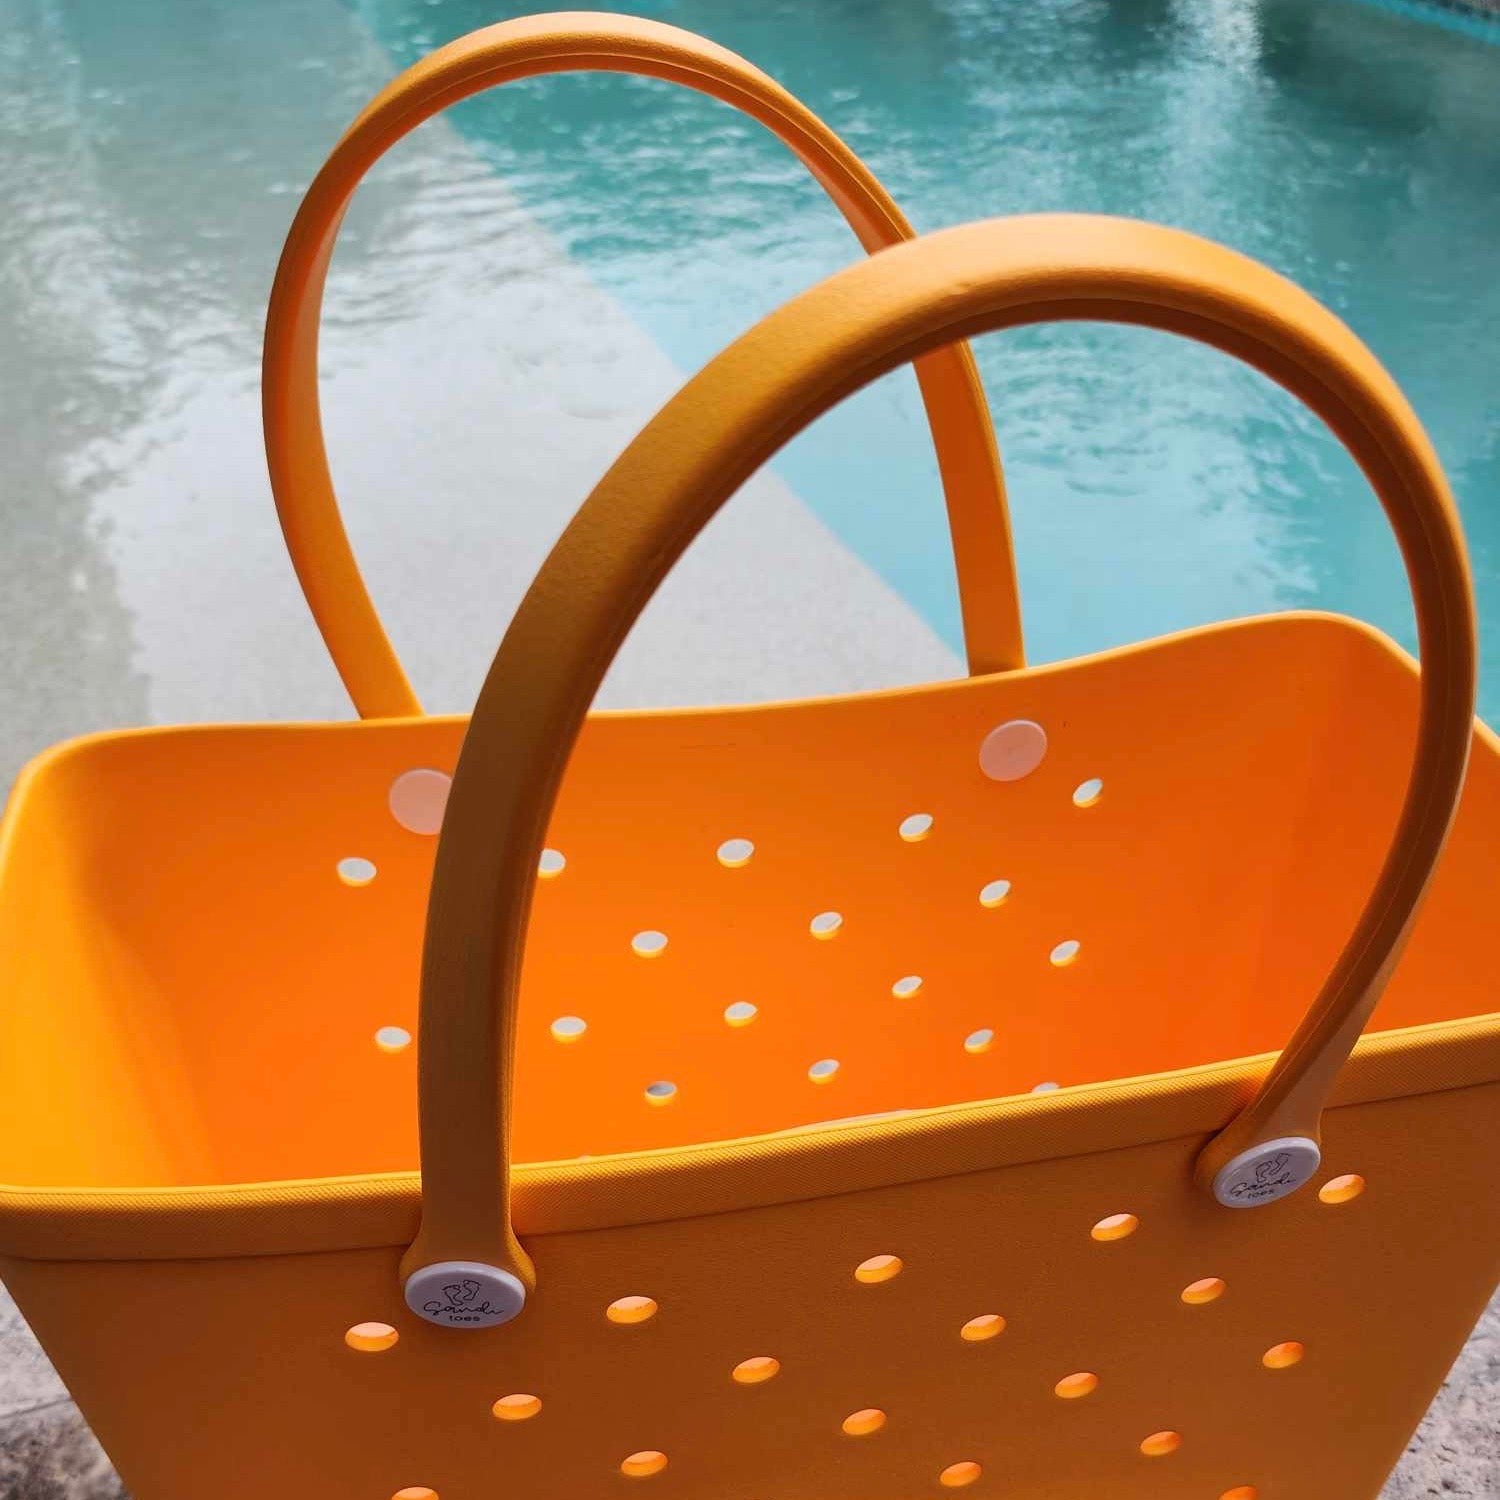 Yellow Summer Bag: Spacious Interior for Poolside Essentials. [Open yellow summer bag sits beside a sparkling pool, revealing a spacious interior perfect for storing towels, sunscreen, and drinks.]